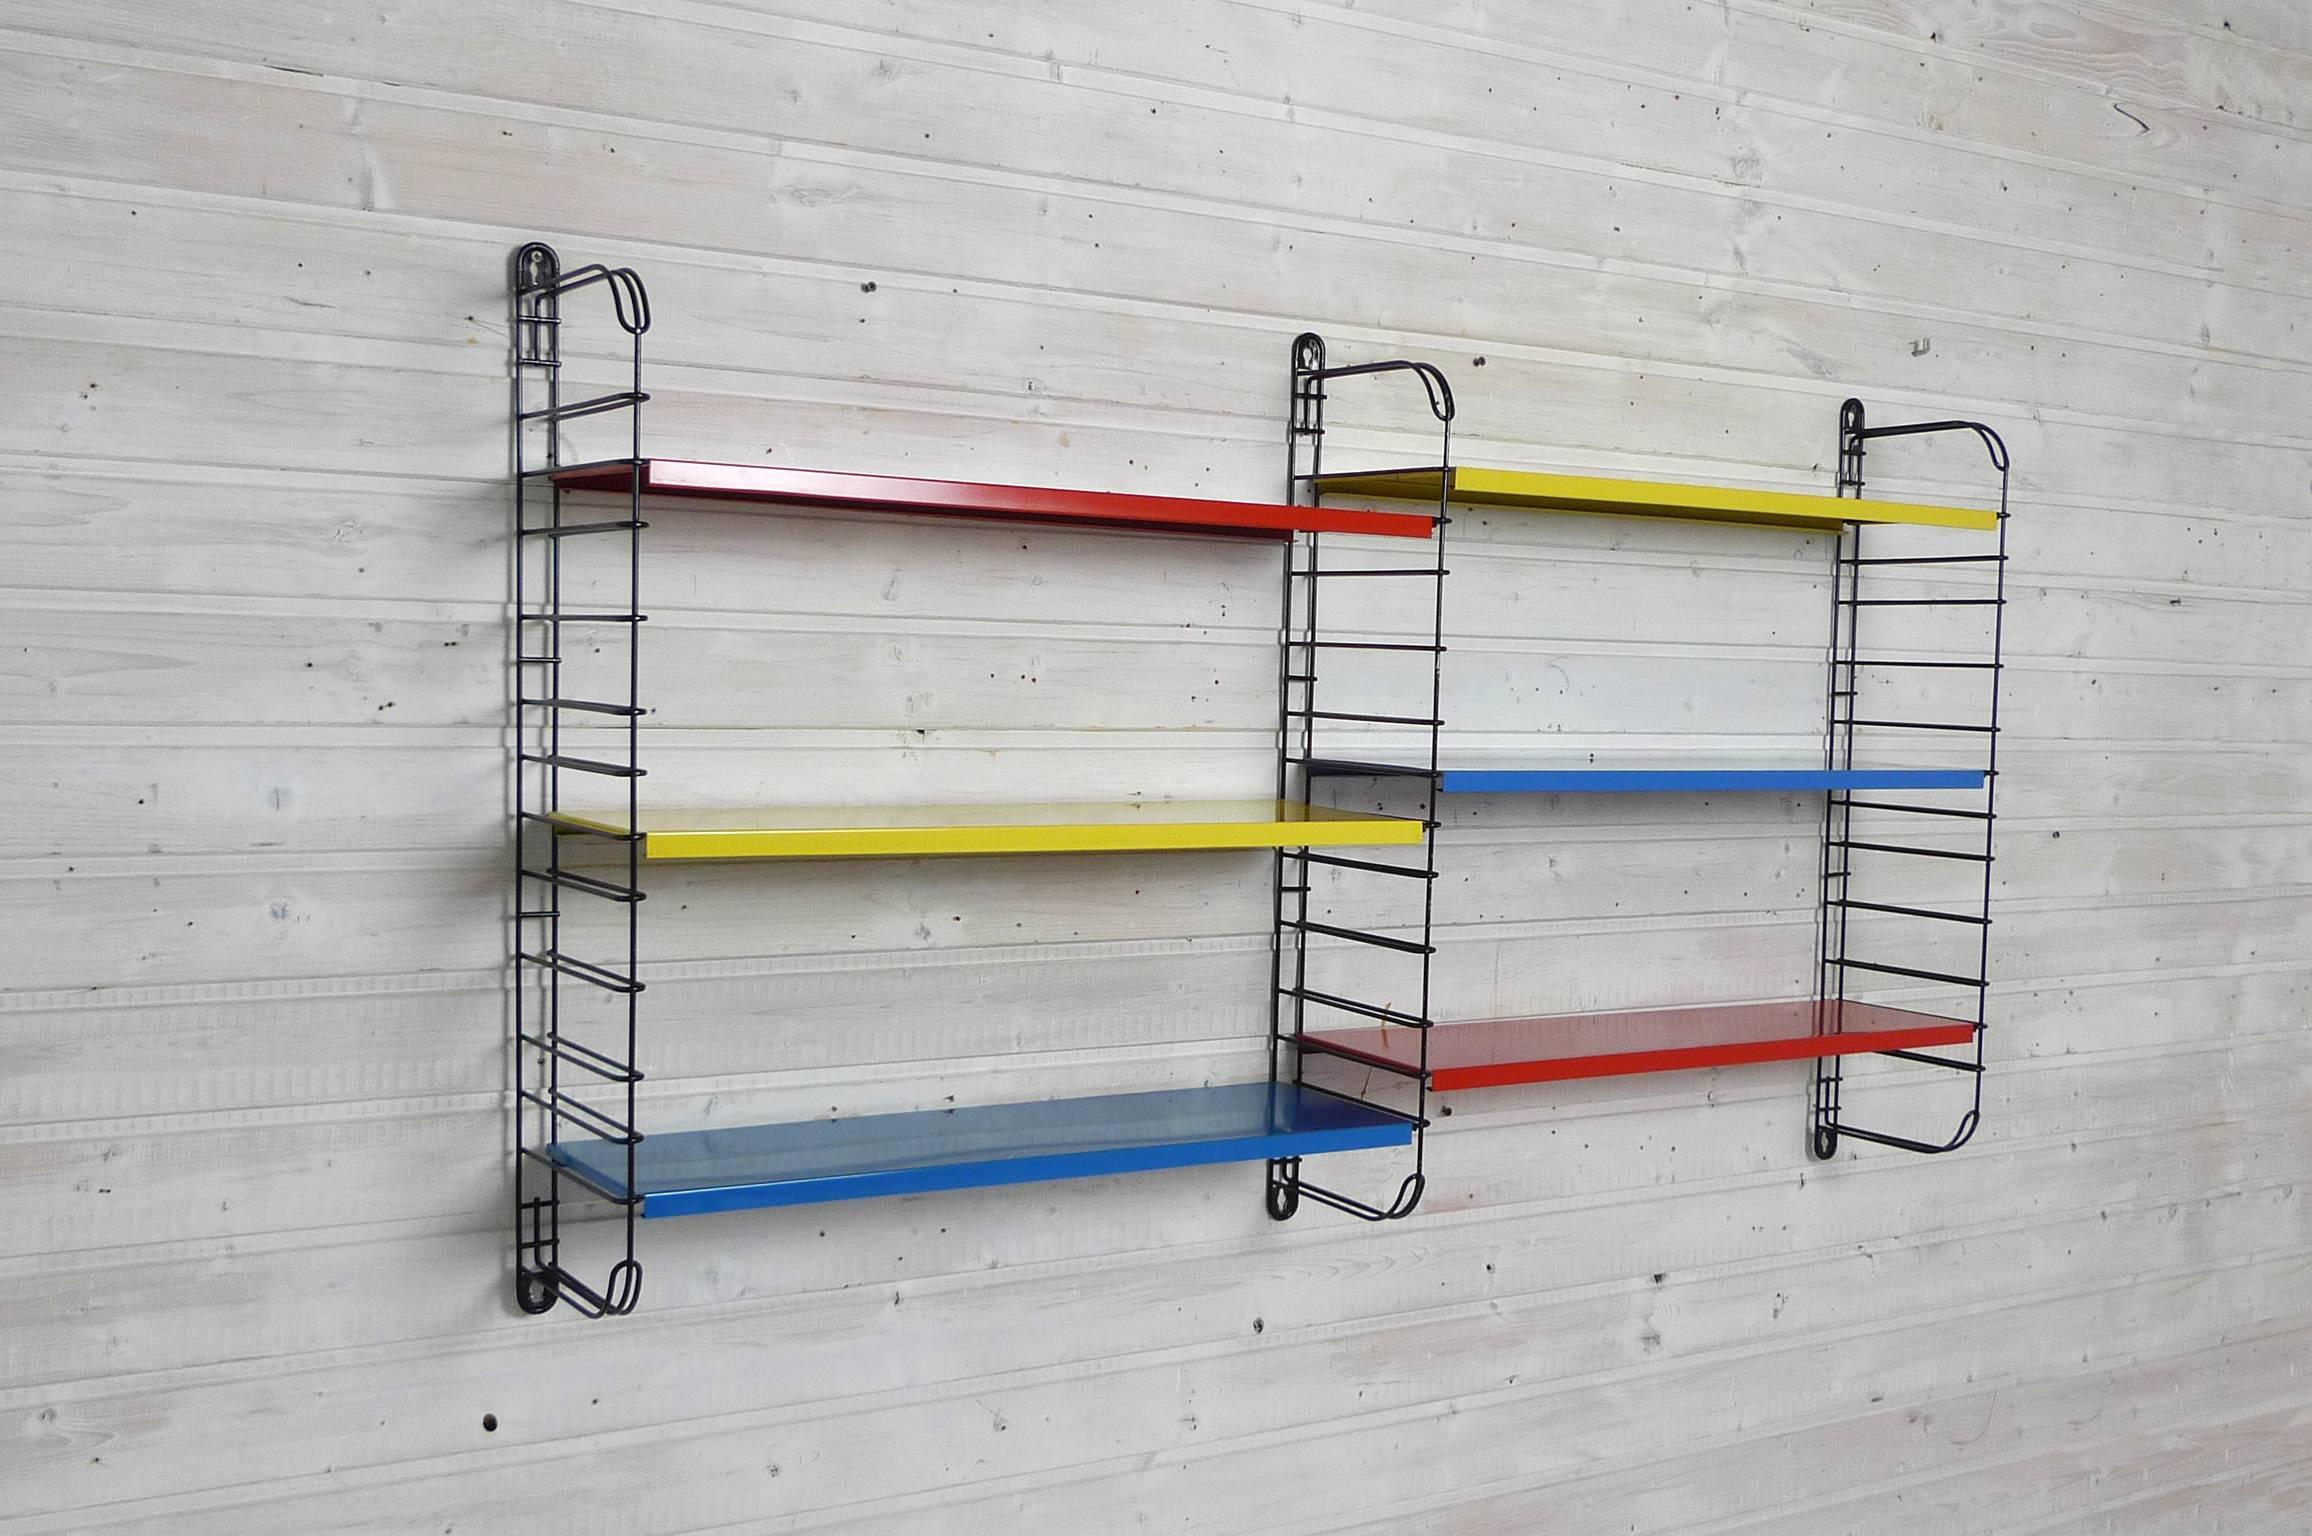 Lacquered Multicolored Metal Rack by Adrian Dekker for Tomado, Netherlands, 1953